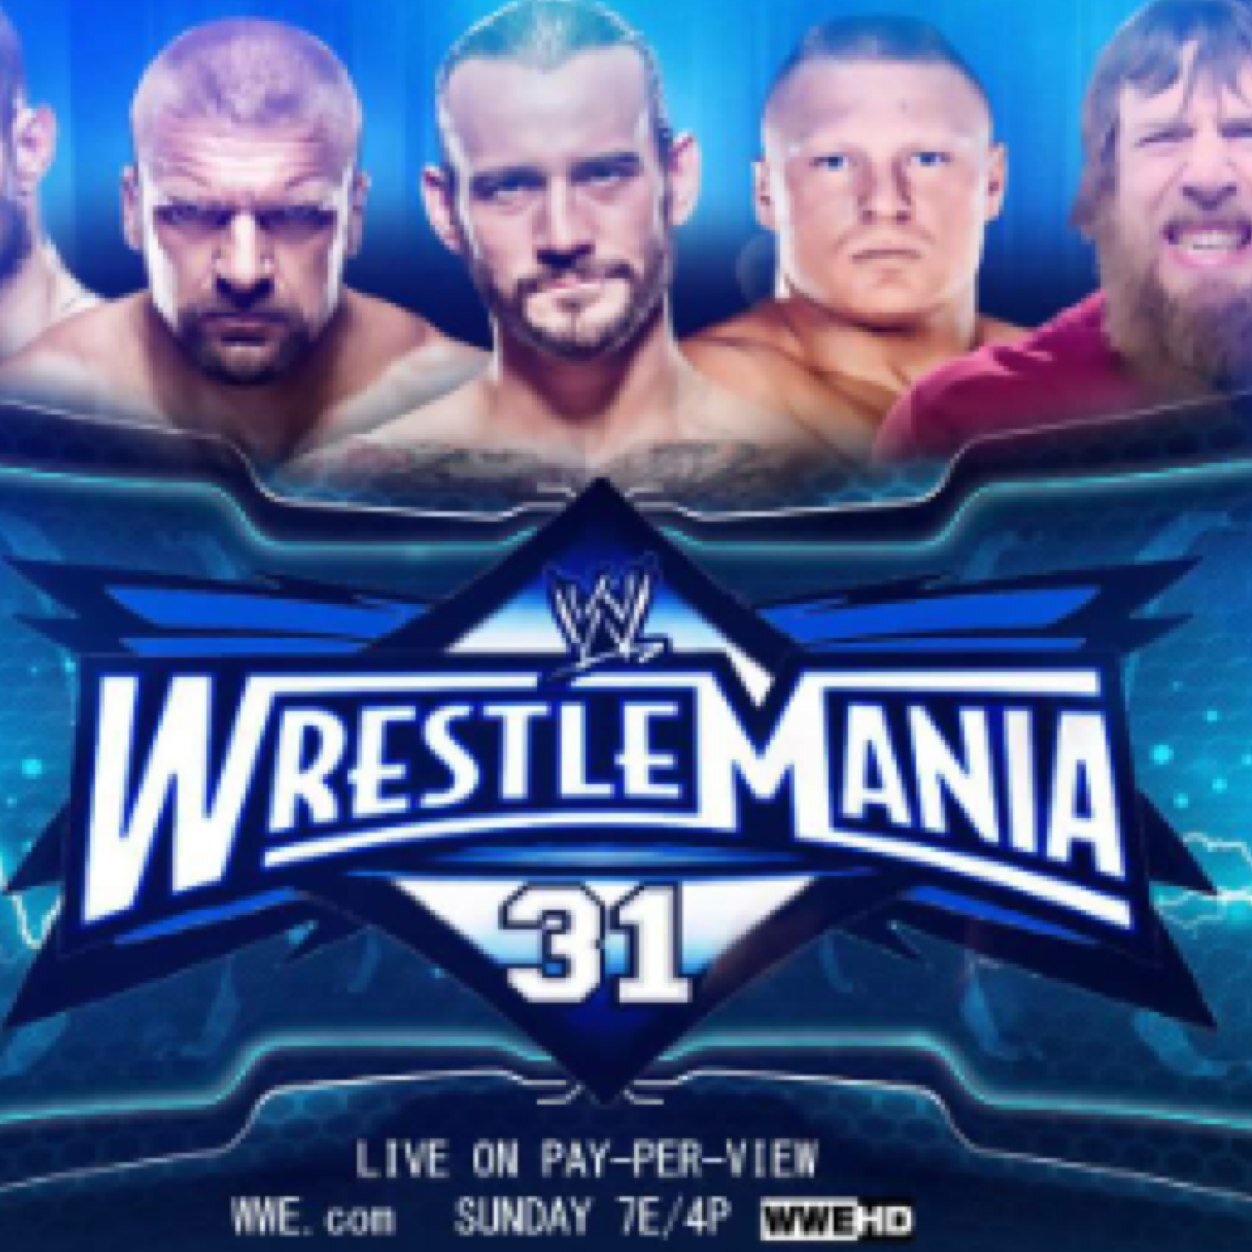 The official Twitter for @WWE WrestleMania XXXI, March 29, 2015 at the Levis Stadium in Santa Clara, California. Follow us for breaking news & special offers!